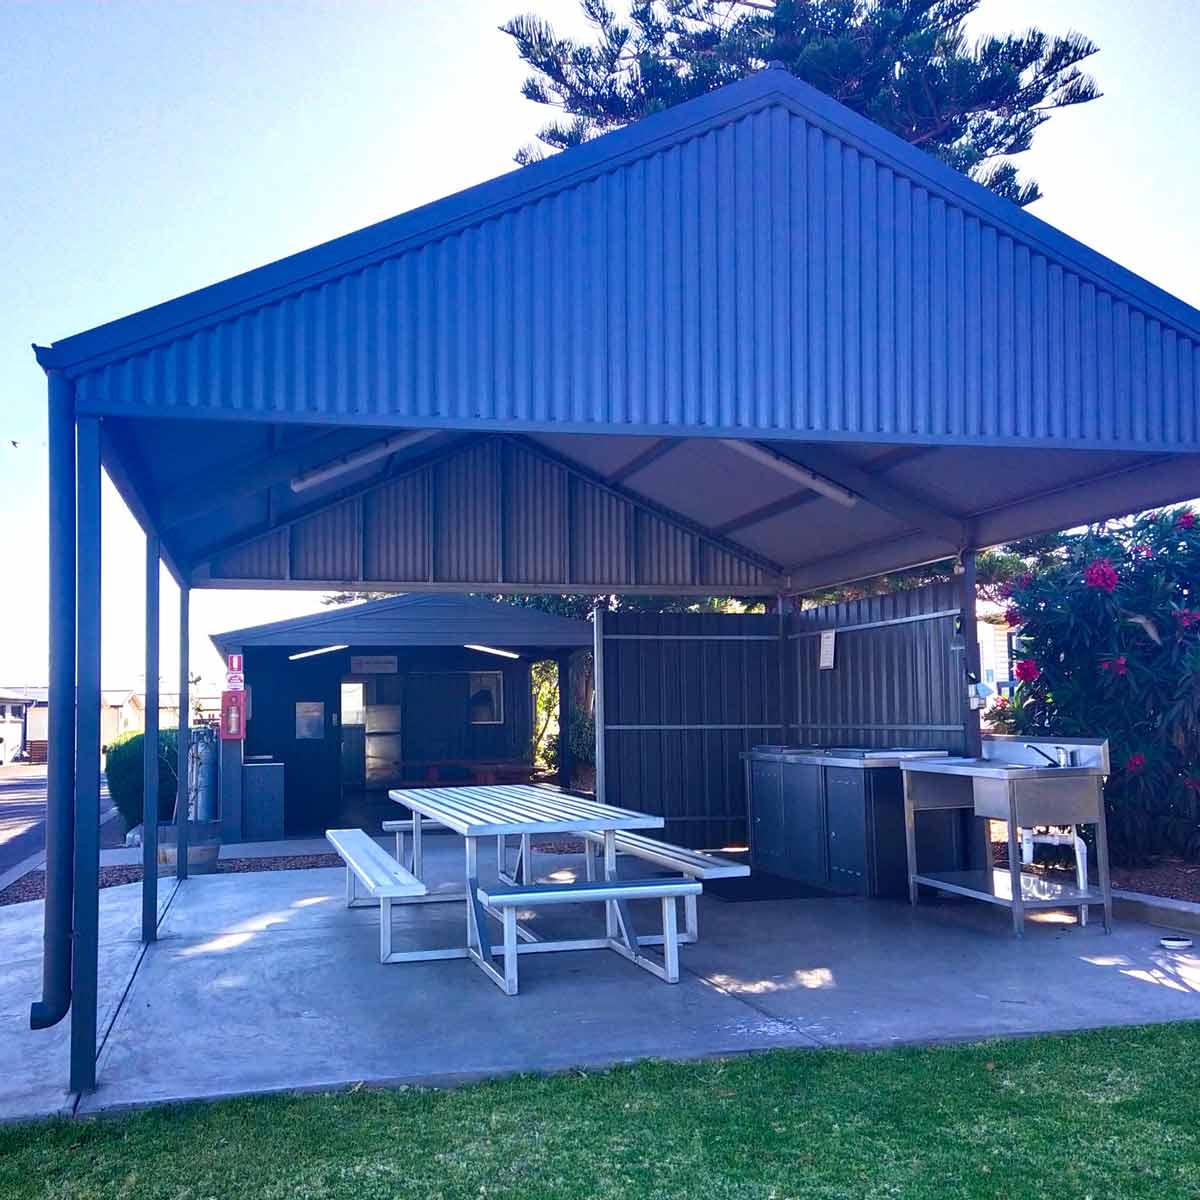 Camp Kitchen at Whyalla Foreshore Discovery Park, Eyre Peninsula, South Australia